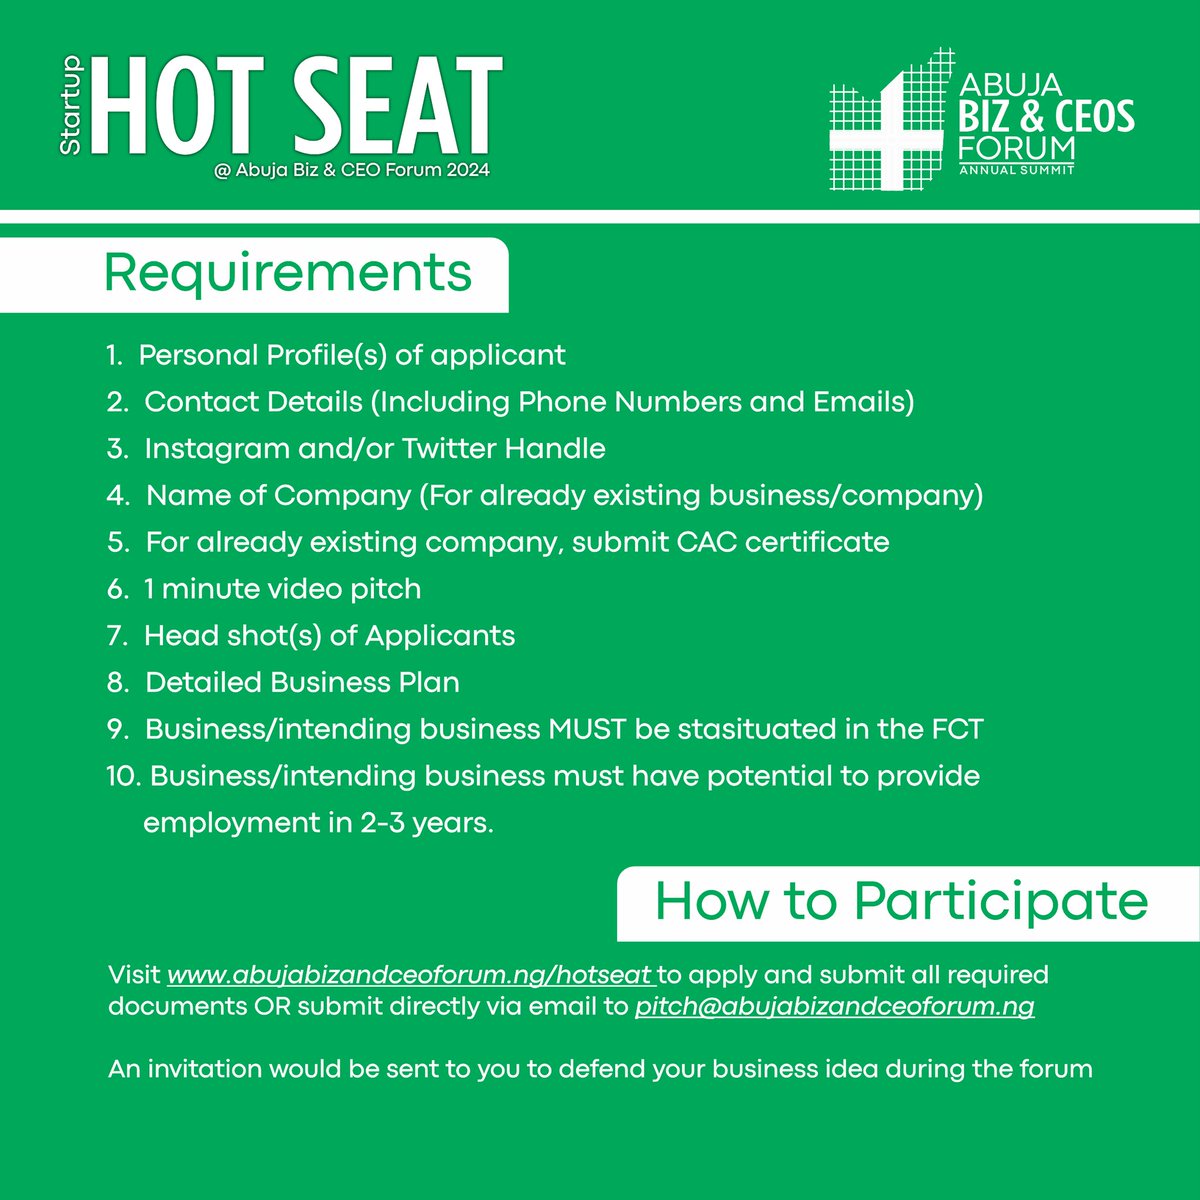 ATTENTION STARTUPS 🚨🚨

The Abuja Business and CEO Forum would be featuring the STARTUP HOT SEAT where startups, inventors and founders will be connected to investors and venture capitalists across multiple industries and sectors 

#AbujaTwitterCommunity
#hotseat #BusinessPlan